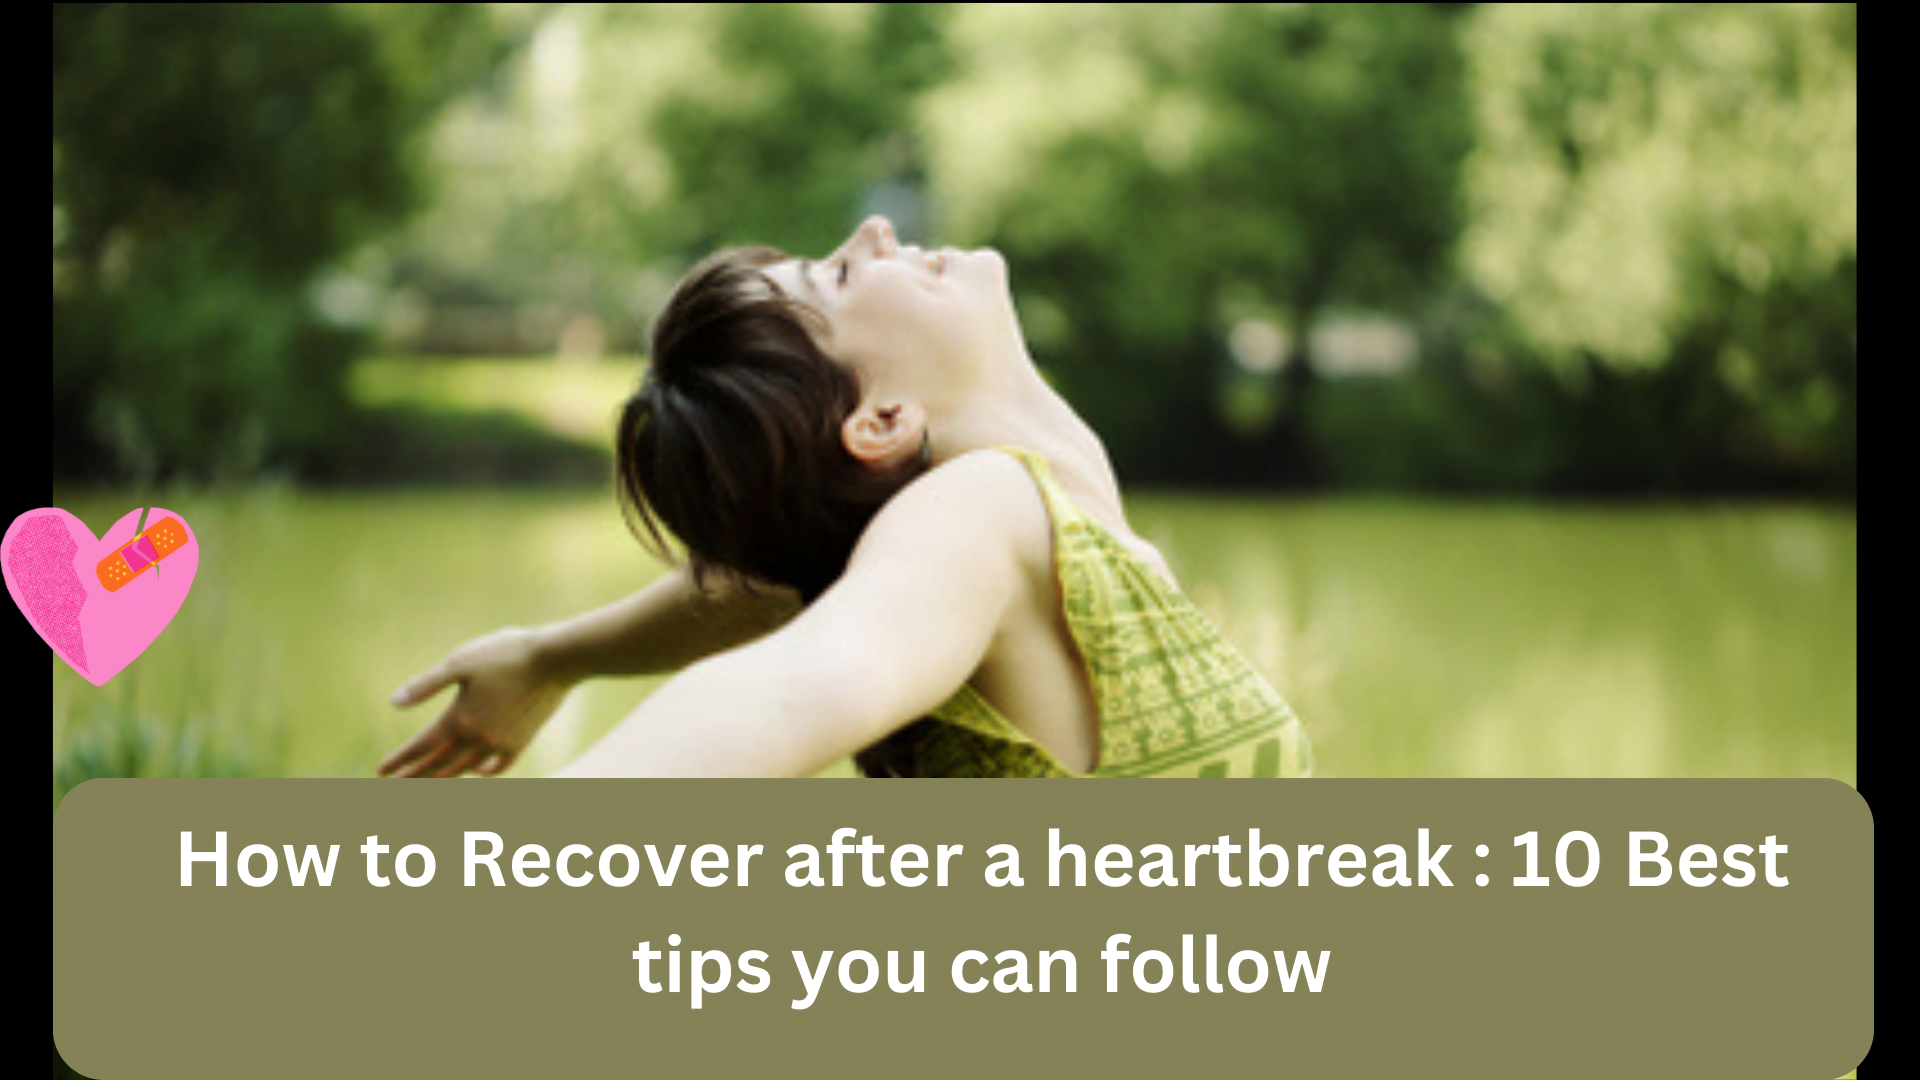 Recover after a heartbreak